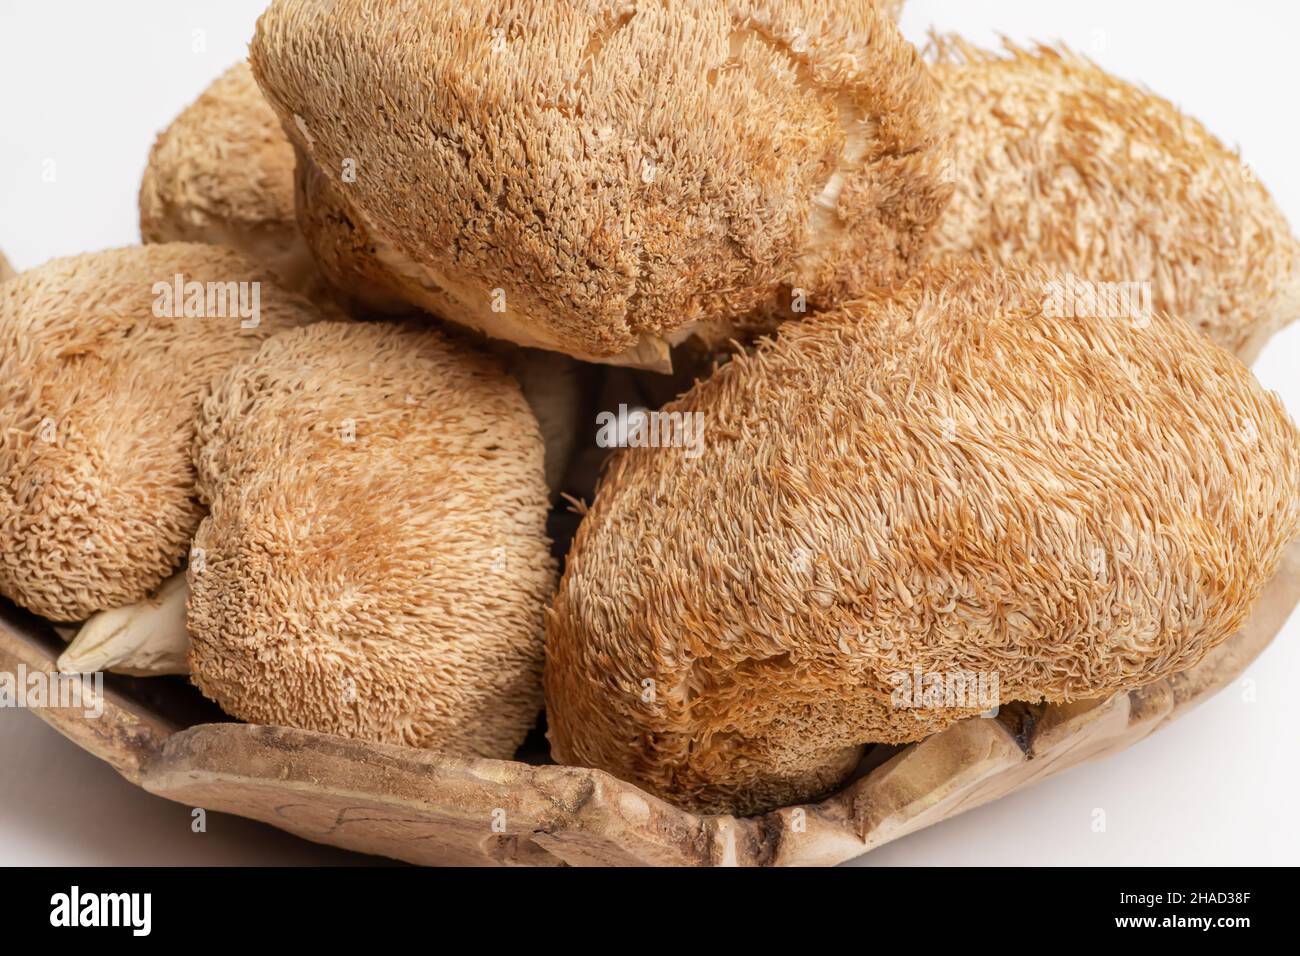 Dried Lion's Mane mushrooms or Hericium Erinaceus also called bearded tooth fungus. Stock Photo